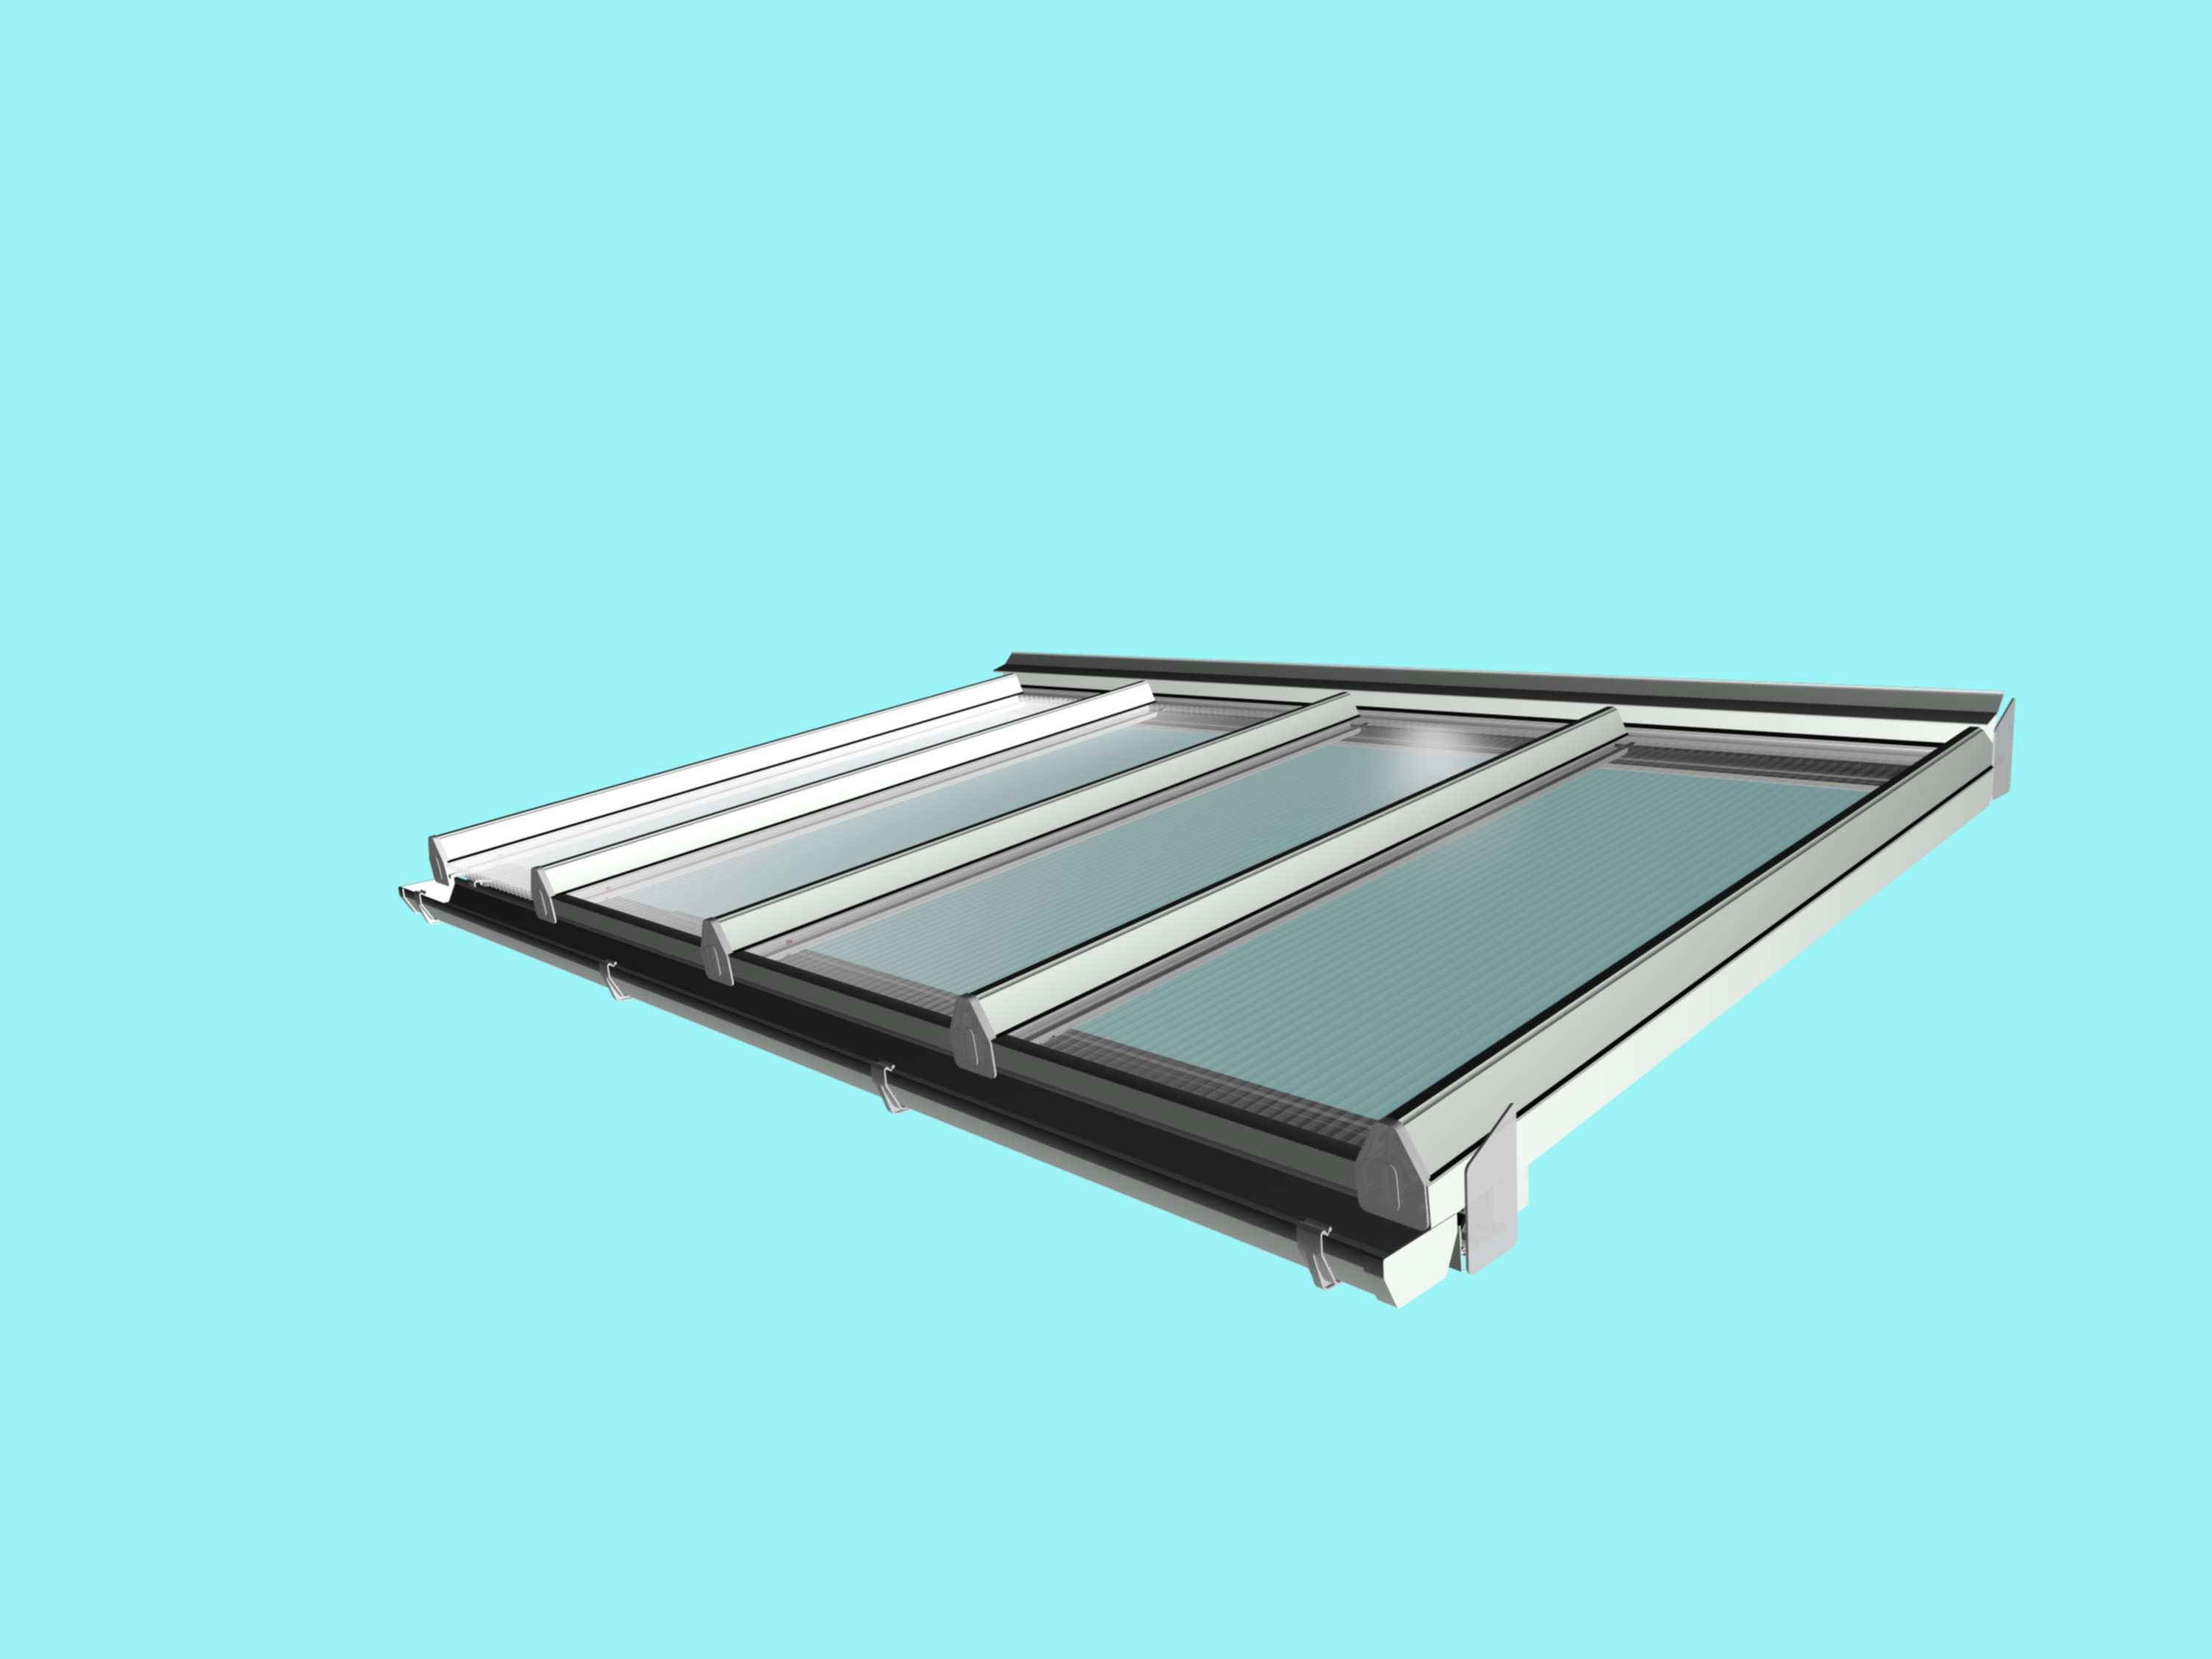 Self-Supporting DIY Conservatory Roof Kit for 25mm polycarbonate, 3.0m wide x 2.5m Projection from Omega Build